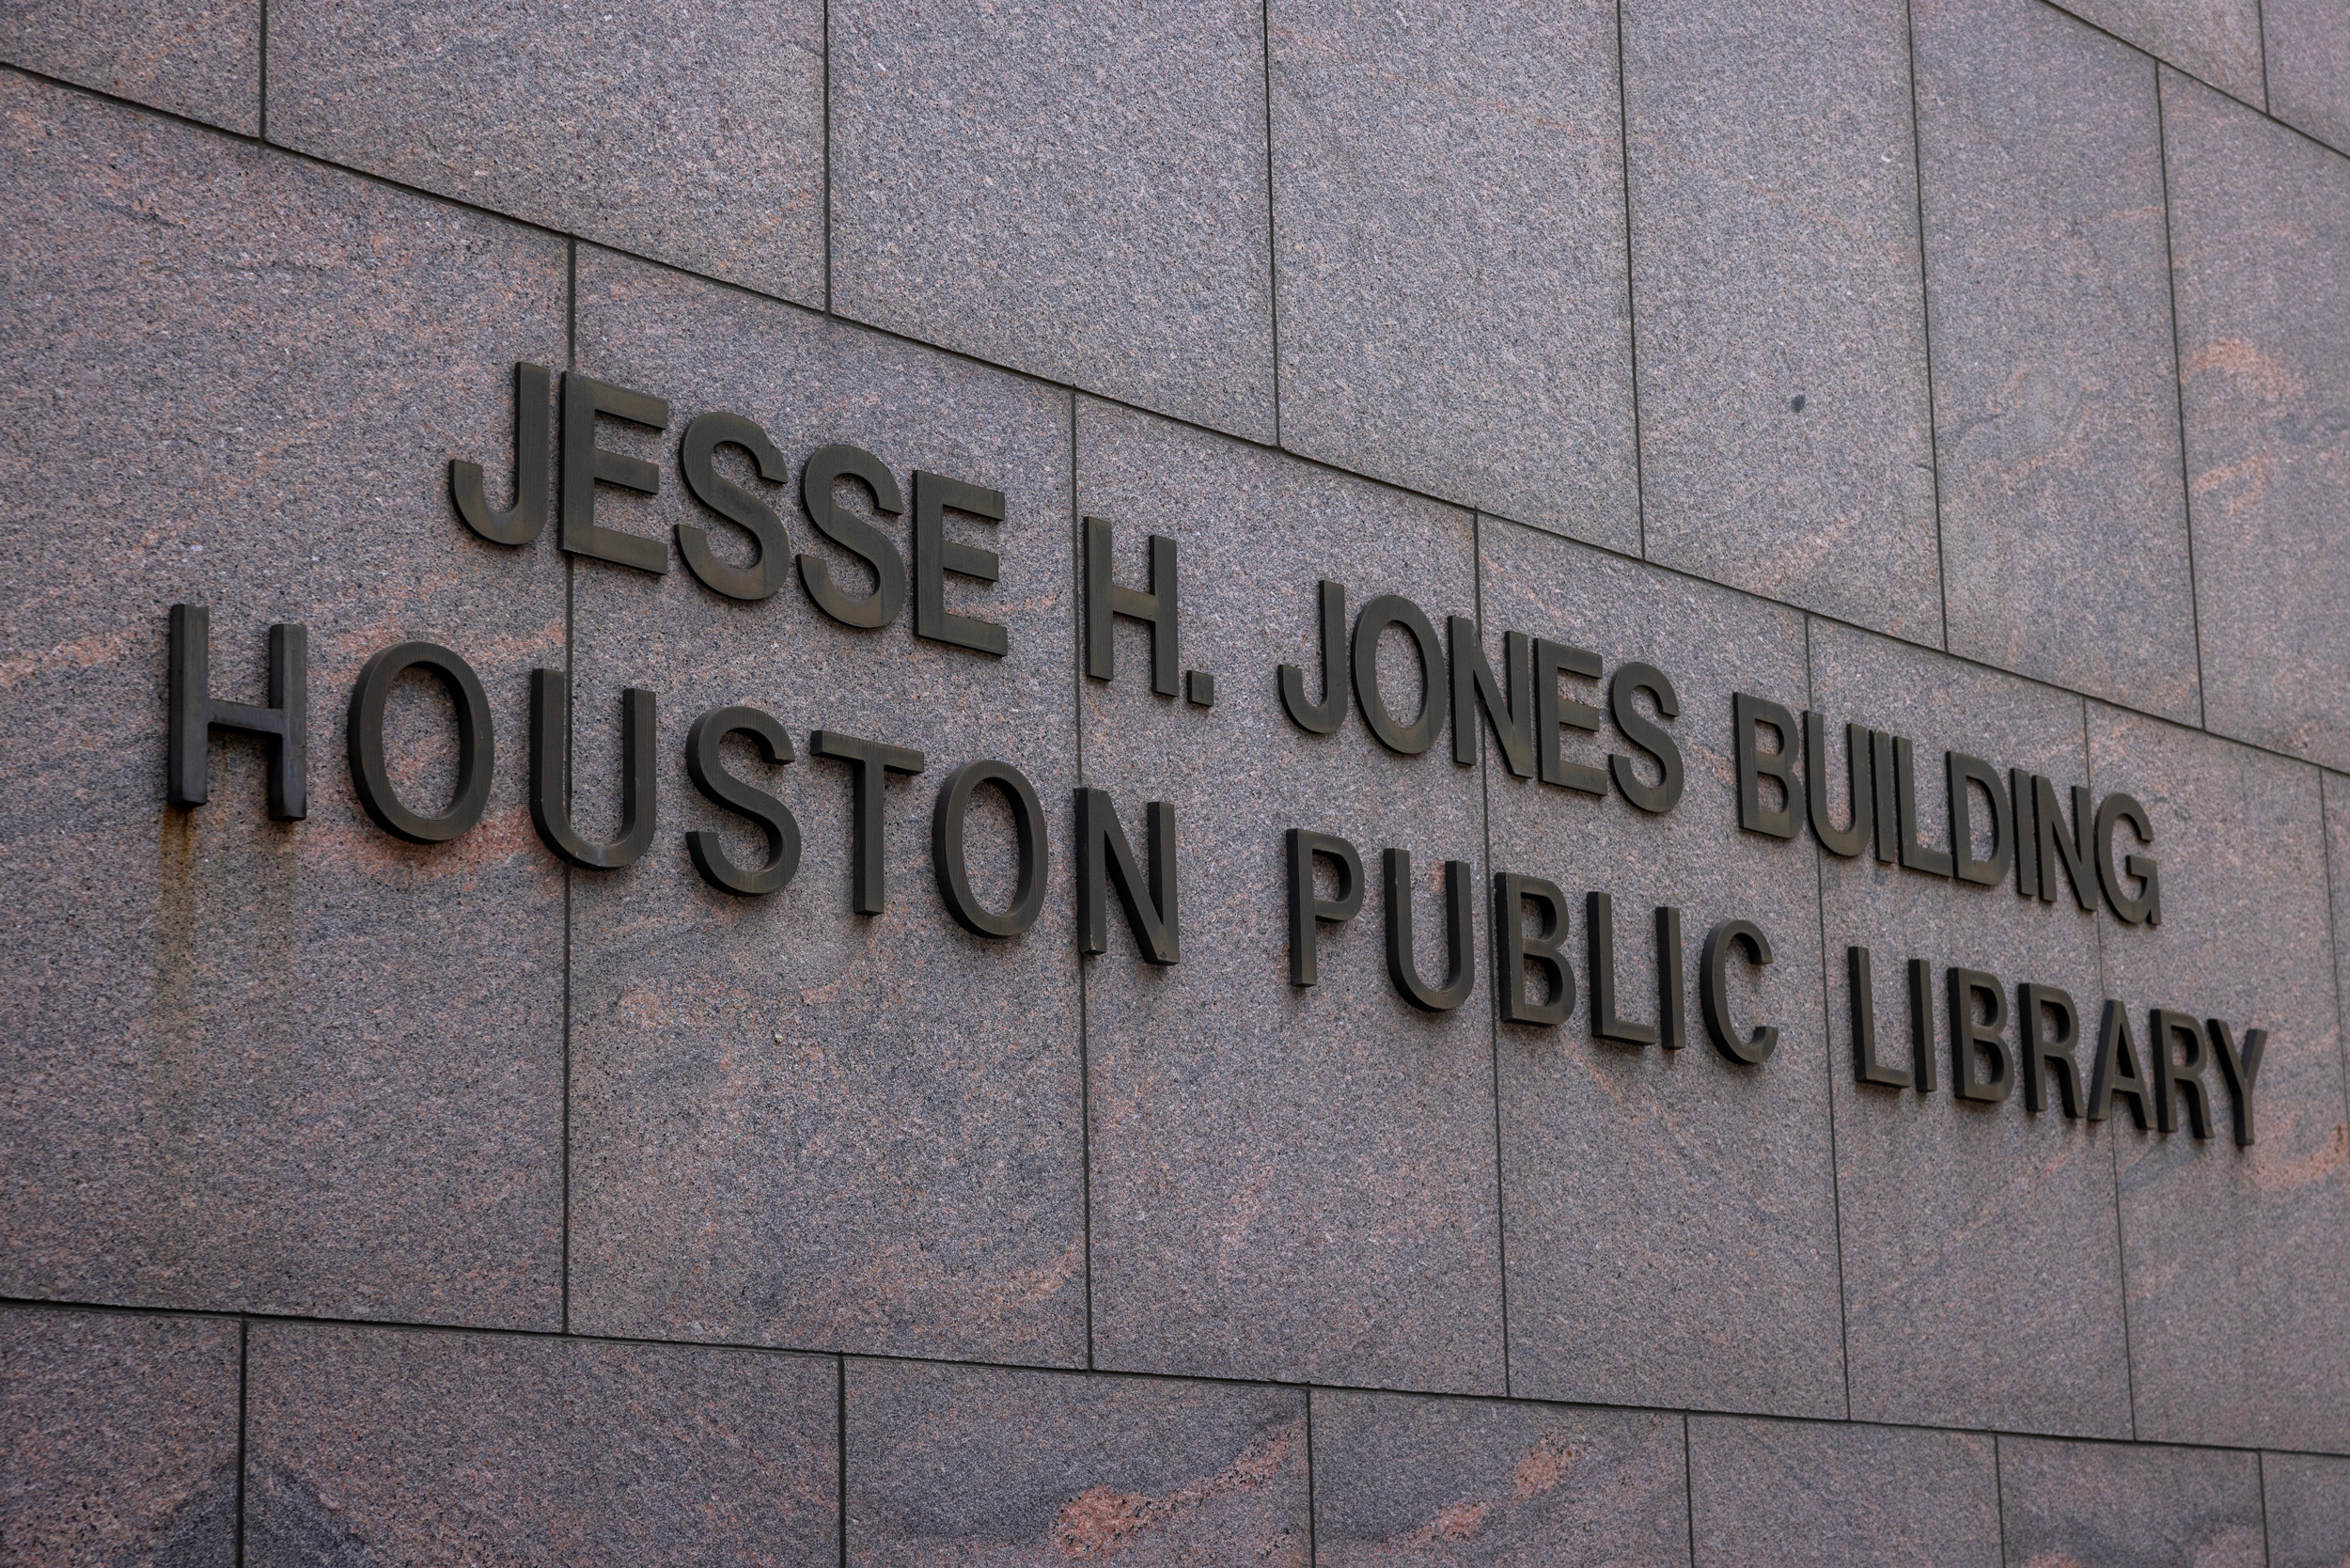 Houston's Central Library